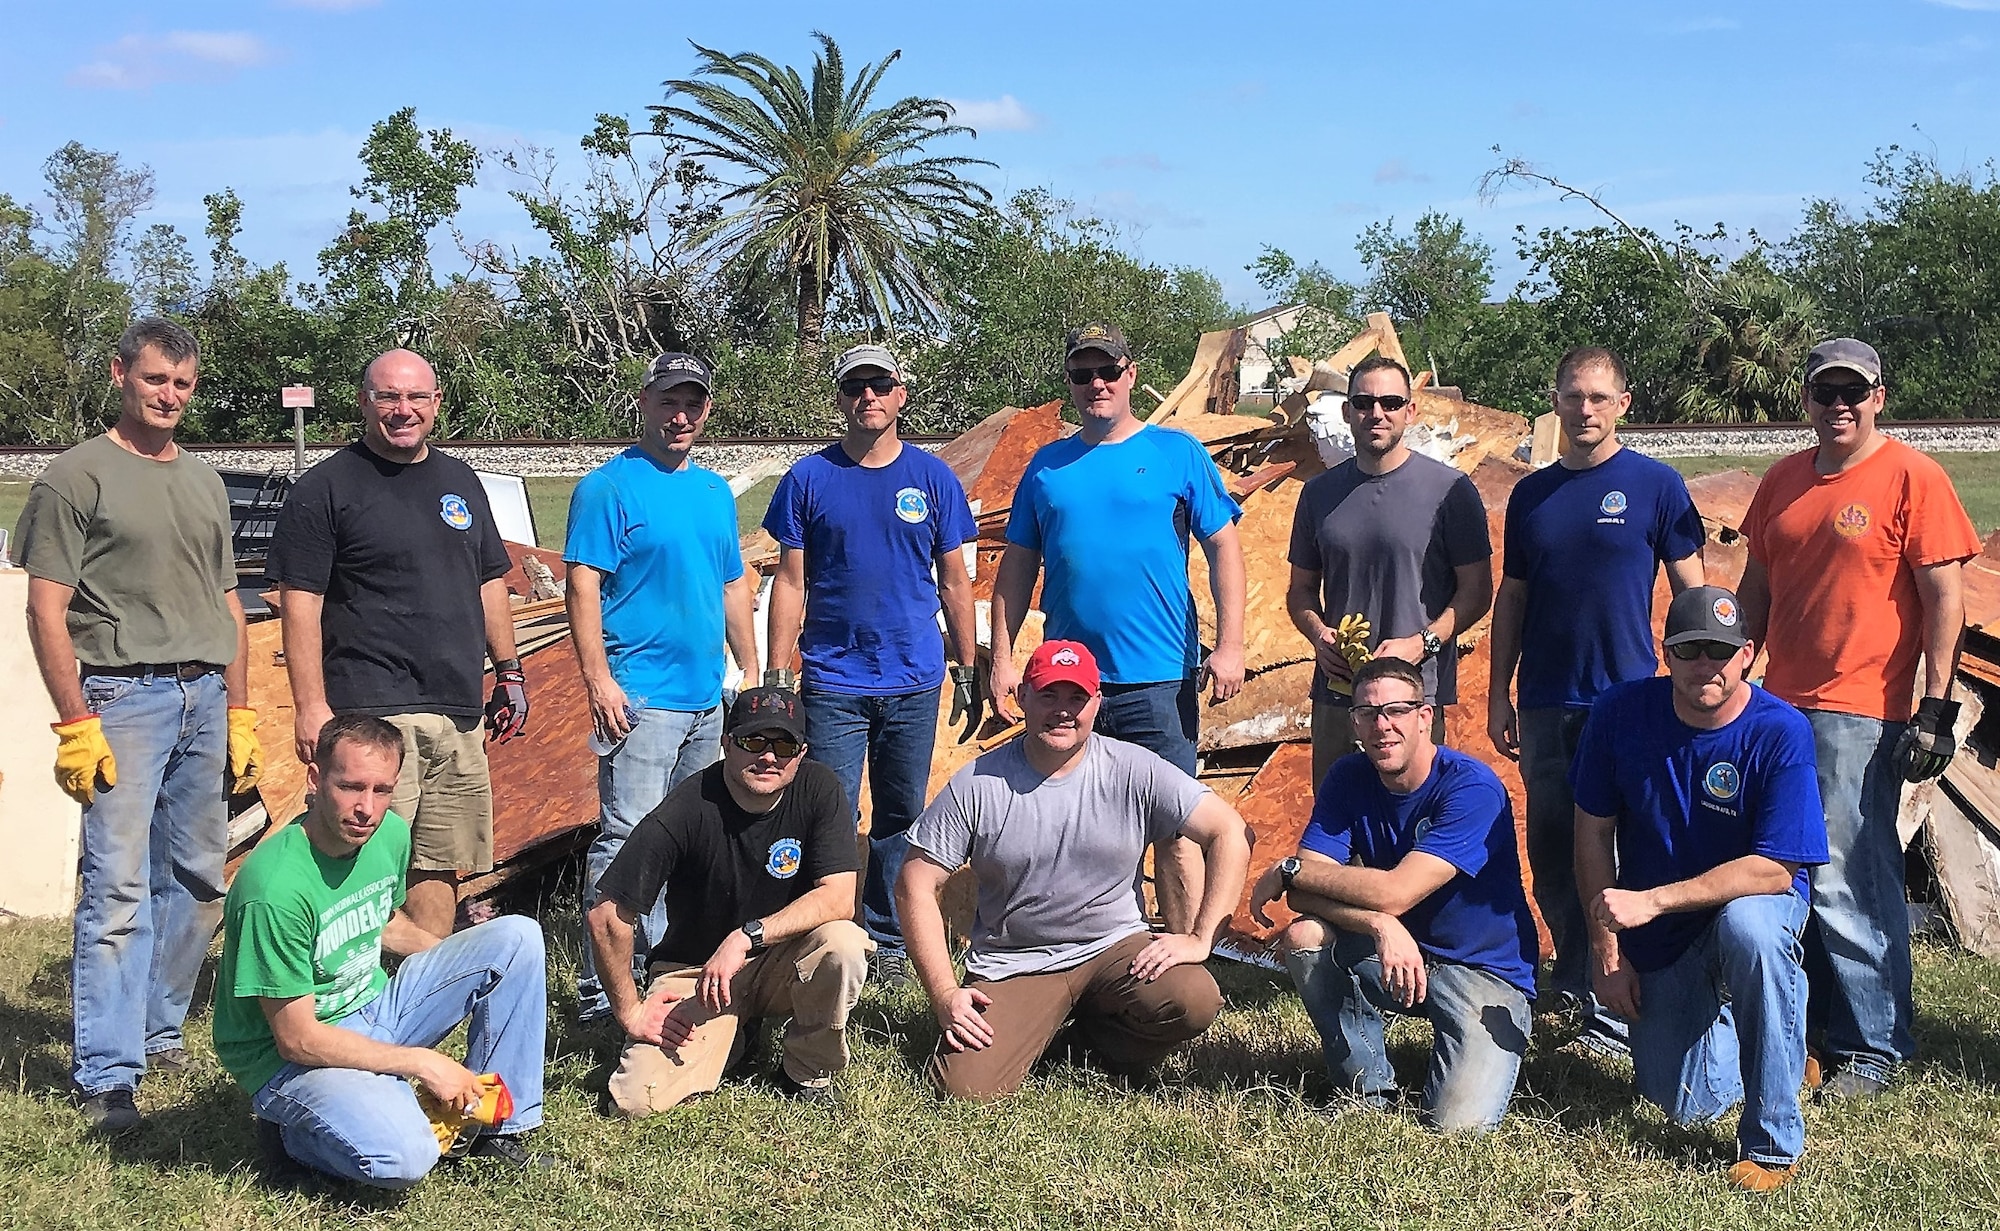 More than a dozen members of the 96th Flying Training Squadron, Laughlin Air Force Base, Texas, used their vacation time to help victims recover from the catastrophic damage incurred during Hurricane Harvey in August 2017. Back row, left to right: Lt. Col. Kervin Waterman, Lt. Col. Wolfgang Von Aspe, Maj. Brian Boettger, Lt. Col. Doug Hayes, Maj. Sam Moore, Maj. William Pope, Lt. Col. Matt Behnken and Lt. Col. Chris Perkins. Front row, left to right: Maj. Aric Wagner, Lt. Col. Vinny Danna, Lt. Col. Kent Bolster, Maj. Jake Hostetler and 96th FTS Commander Lt. Col. Keith Shearin. (U.S. Air Force photo by Maj. David Mitchell, 96th FTS)